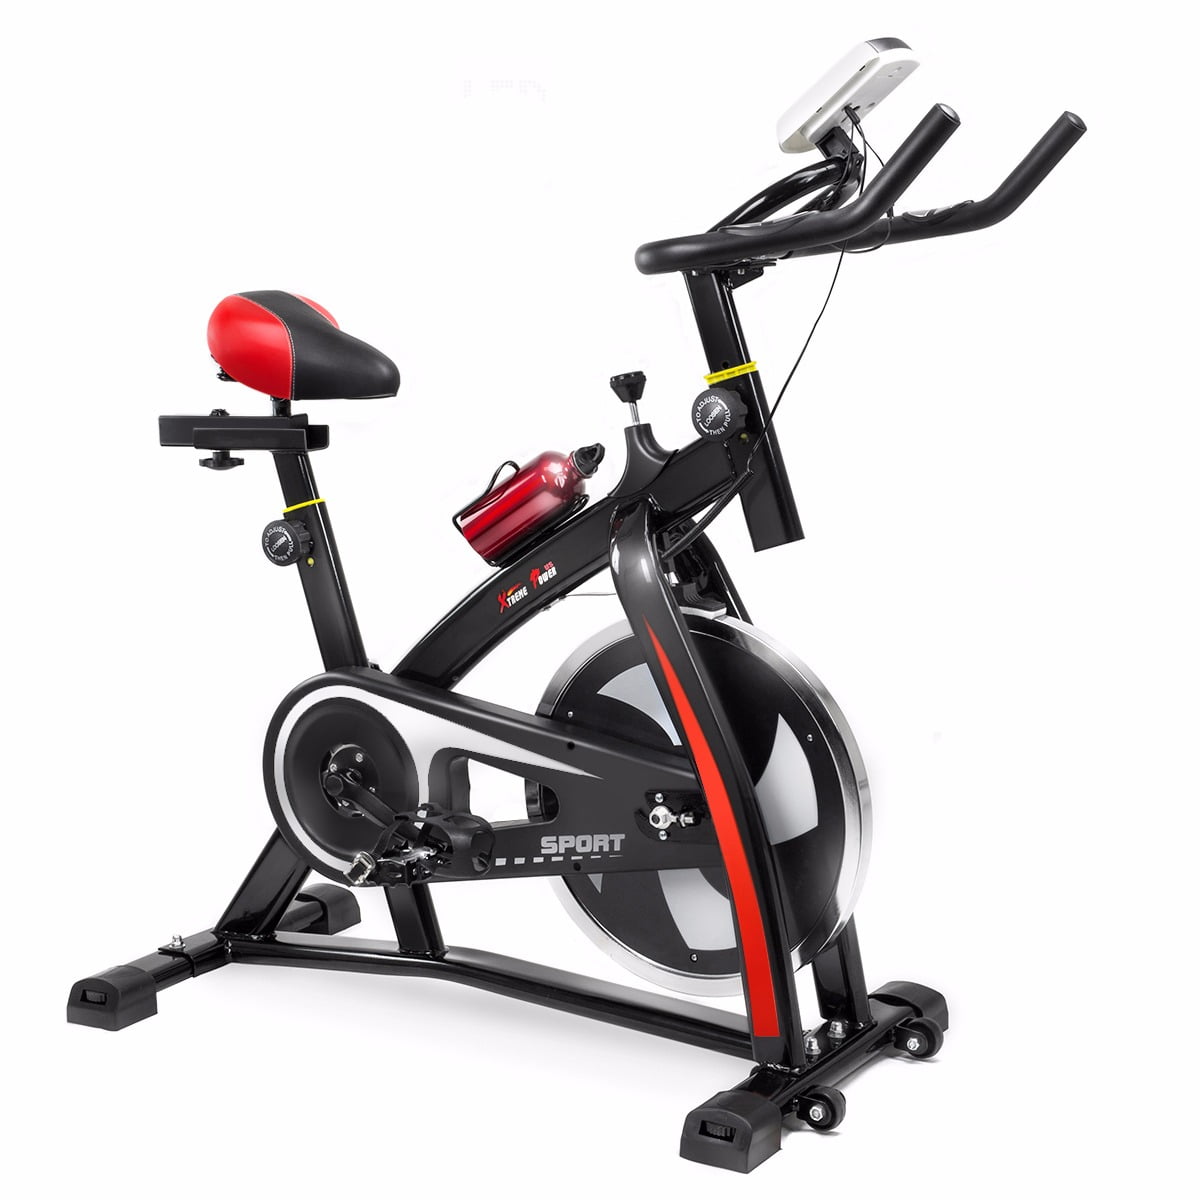 Stationary Exercise Bike Bicycle Trainer Fitness Cardio Cycling Training Details about   2in1 